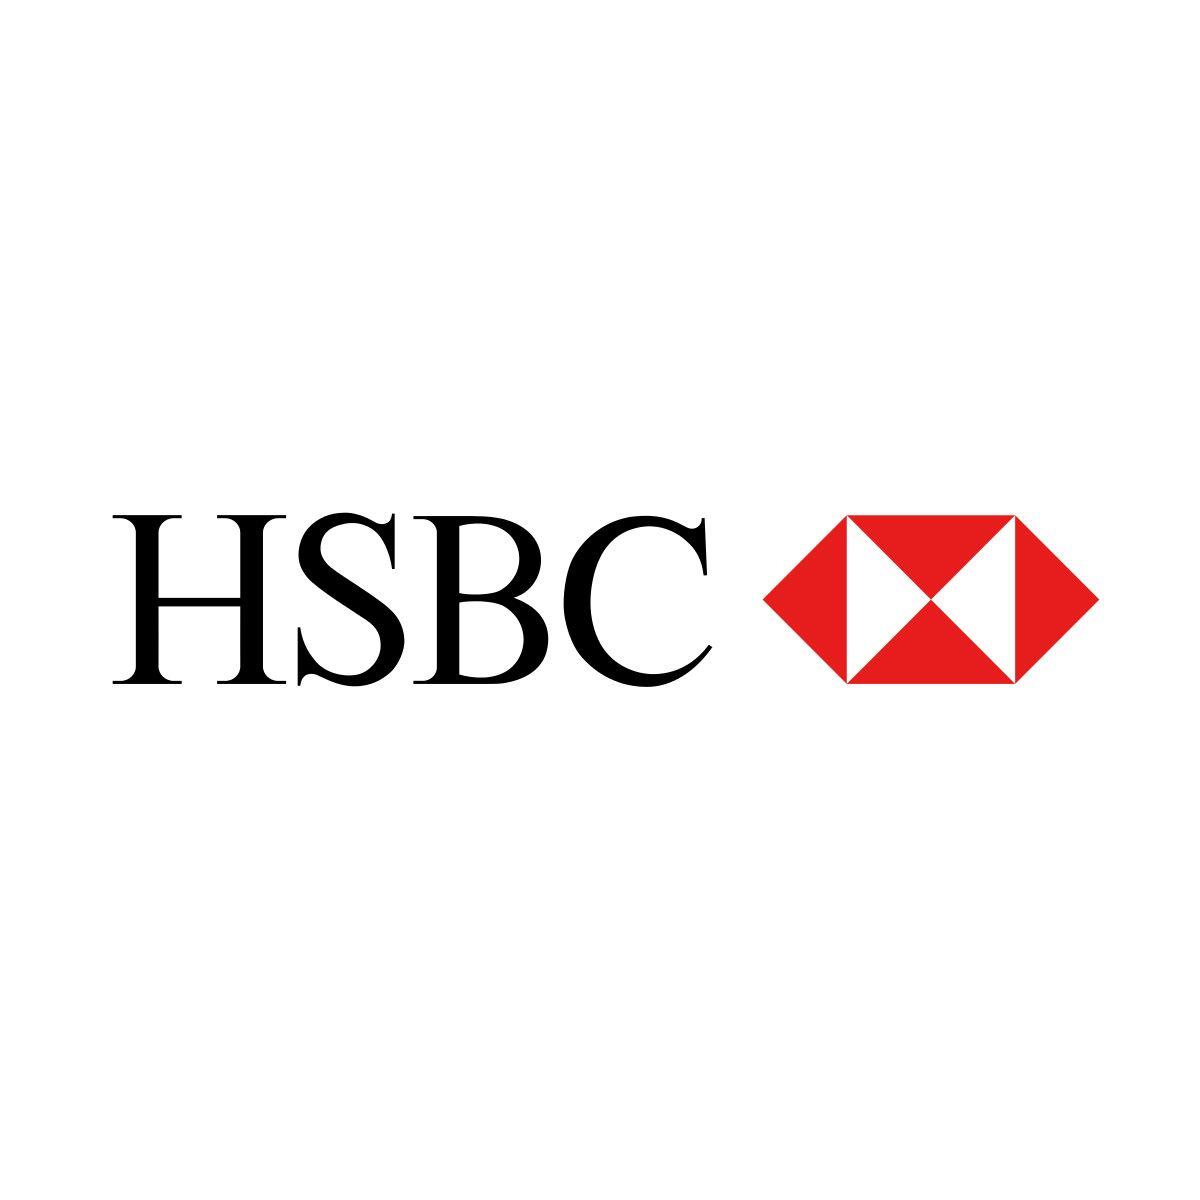 HSBC Logo - Welcome to HSBC UK banking products including current accounts ...